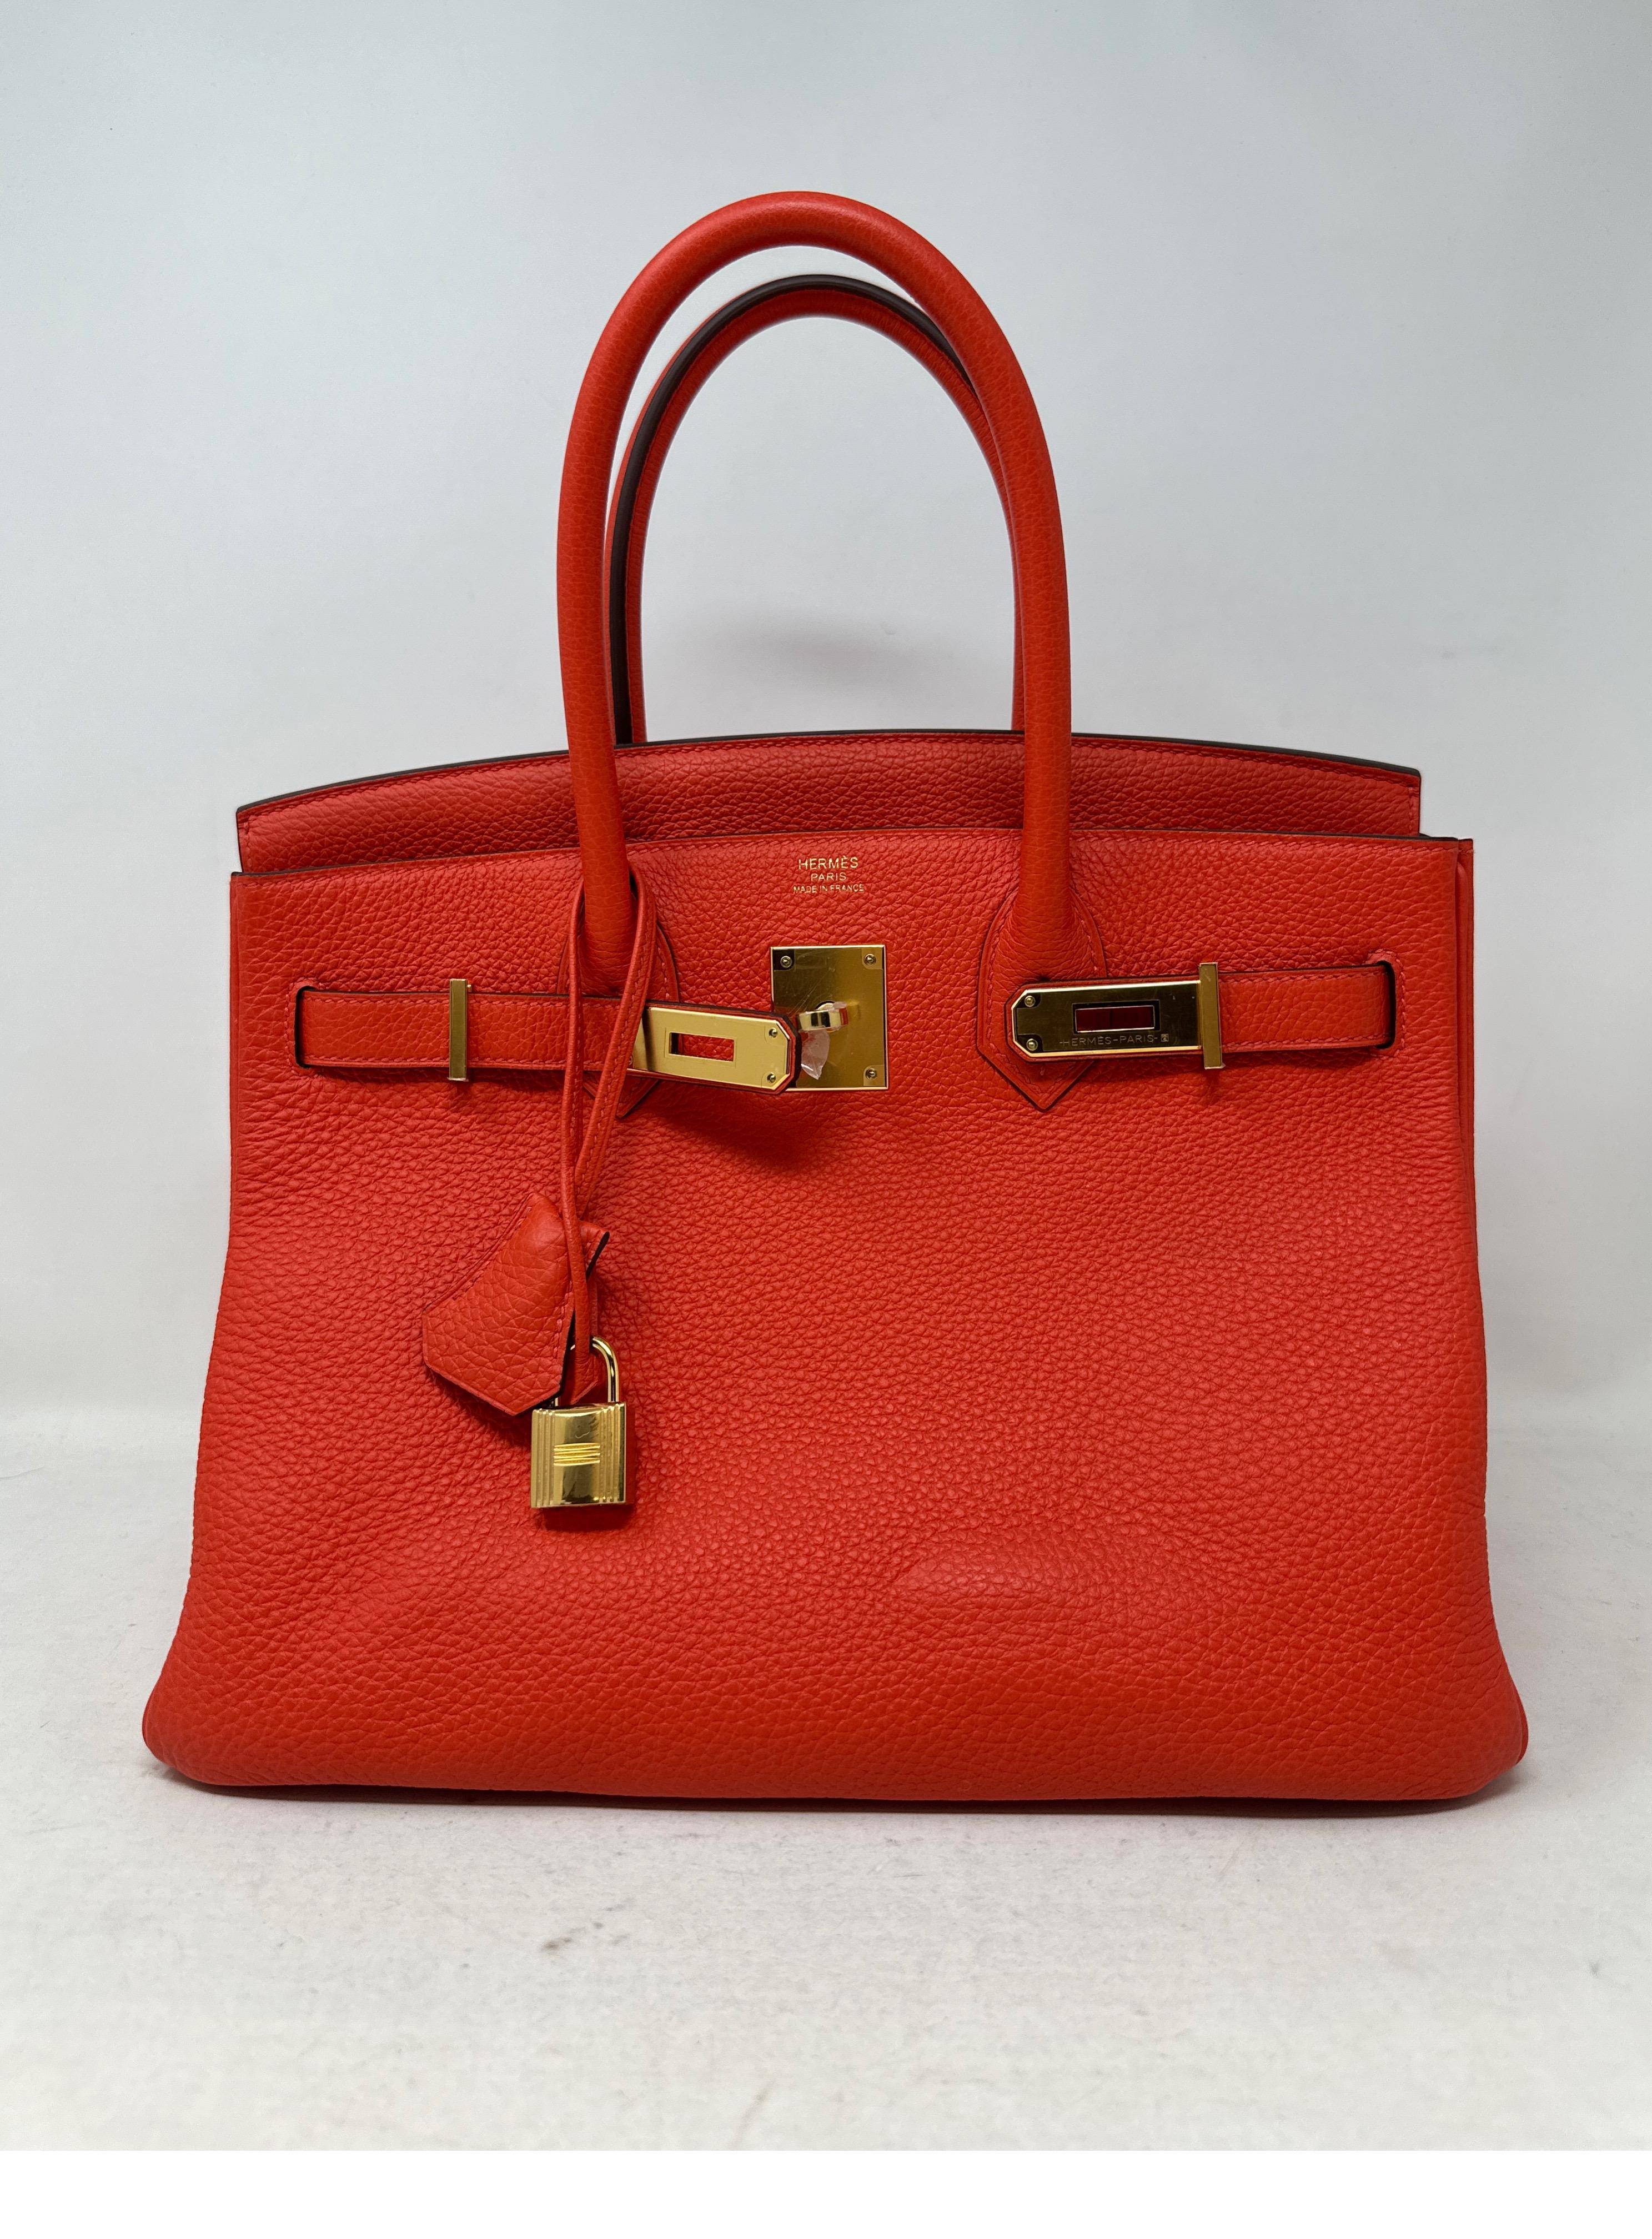 Hermes Capucine Birkin 30 Bag. New 2023 Birkin bag. Poppy orange color. Gold hardware. Interior clean. Most wanted size. Plastic still on hardware. Don't miss out on this investment bag. Includes clochette, lock, keys, and dust bag. Guaranteed